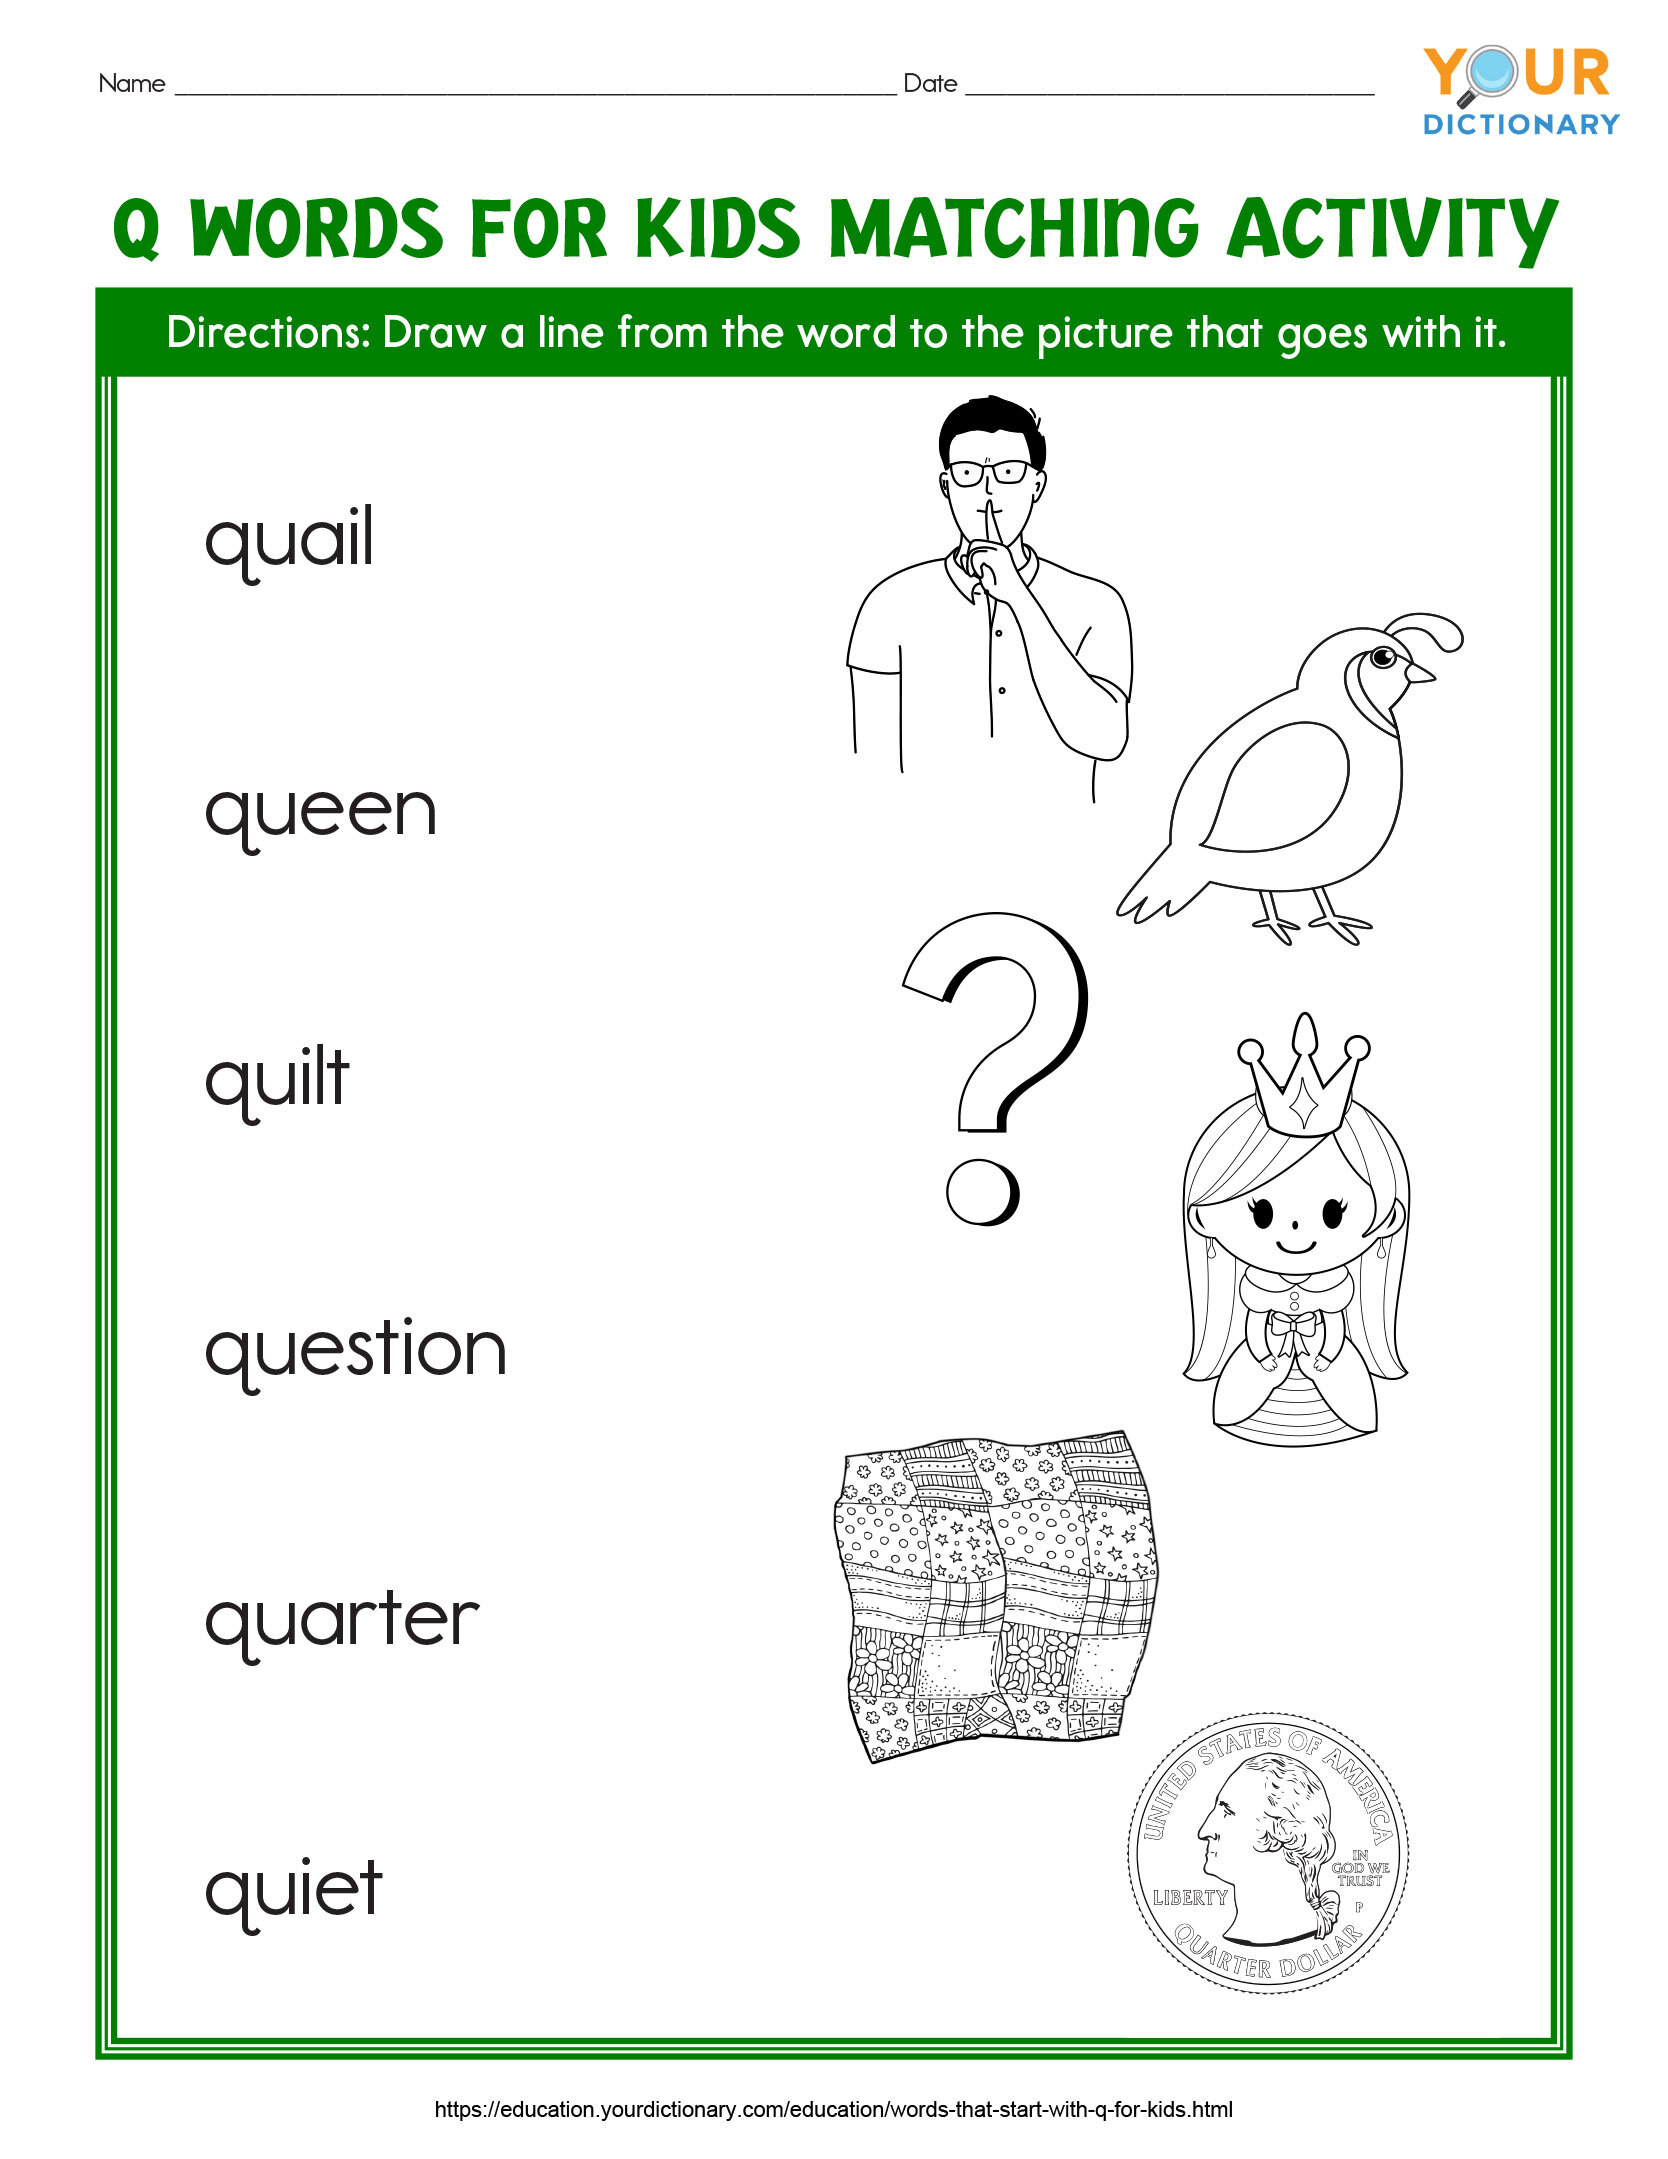 q words for kids matching activity printable